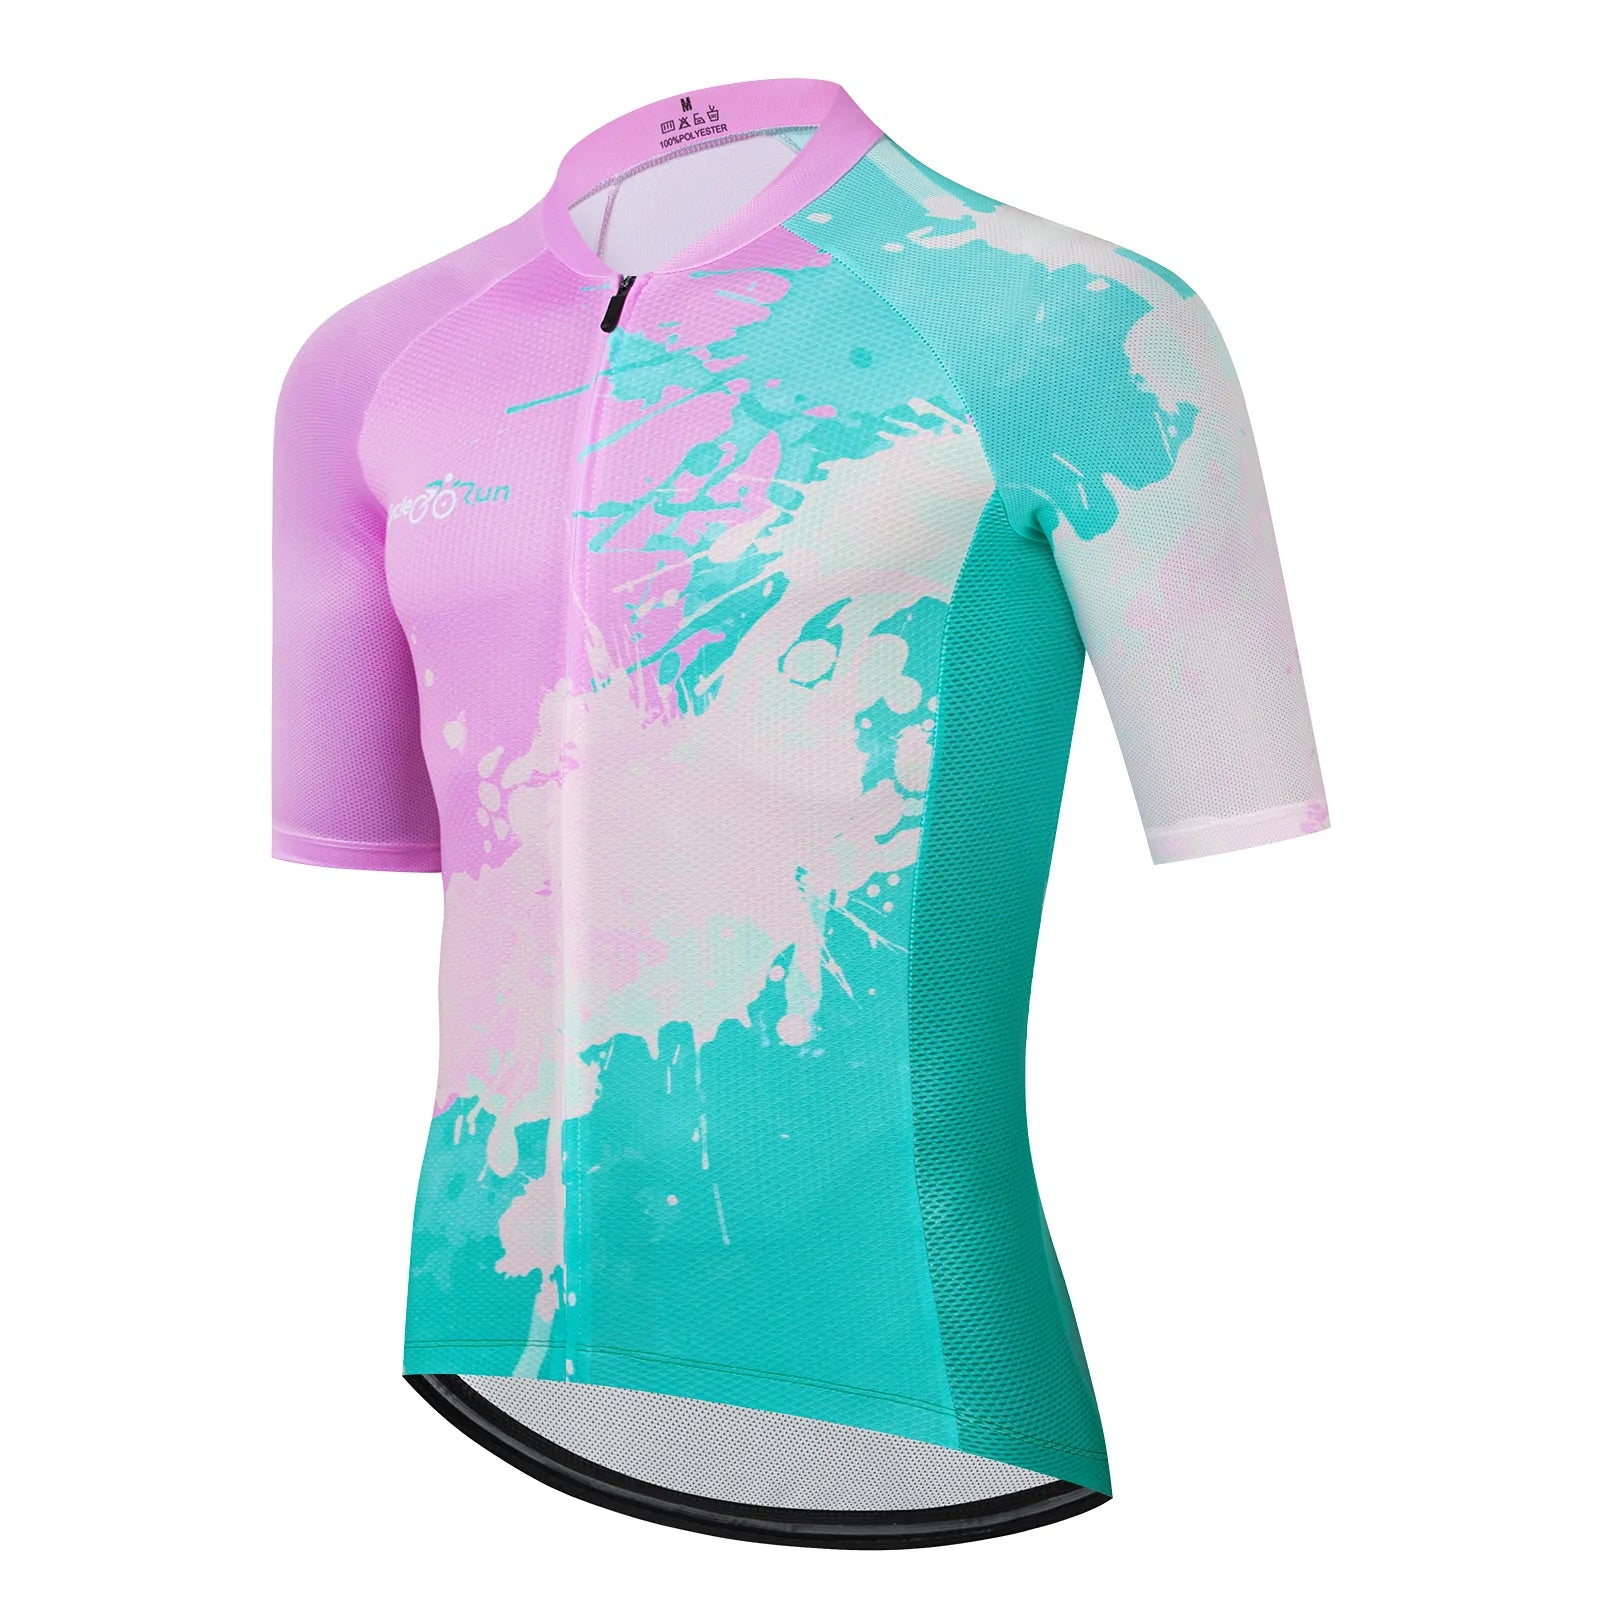 Lilach paint splash cycling jersey for women